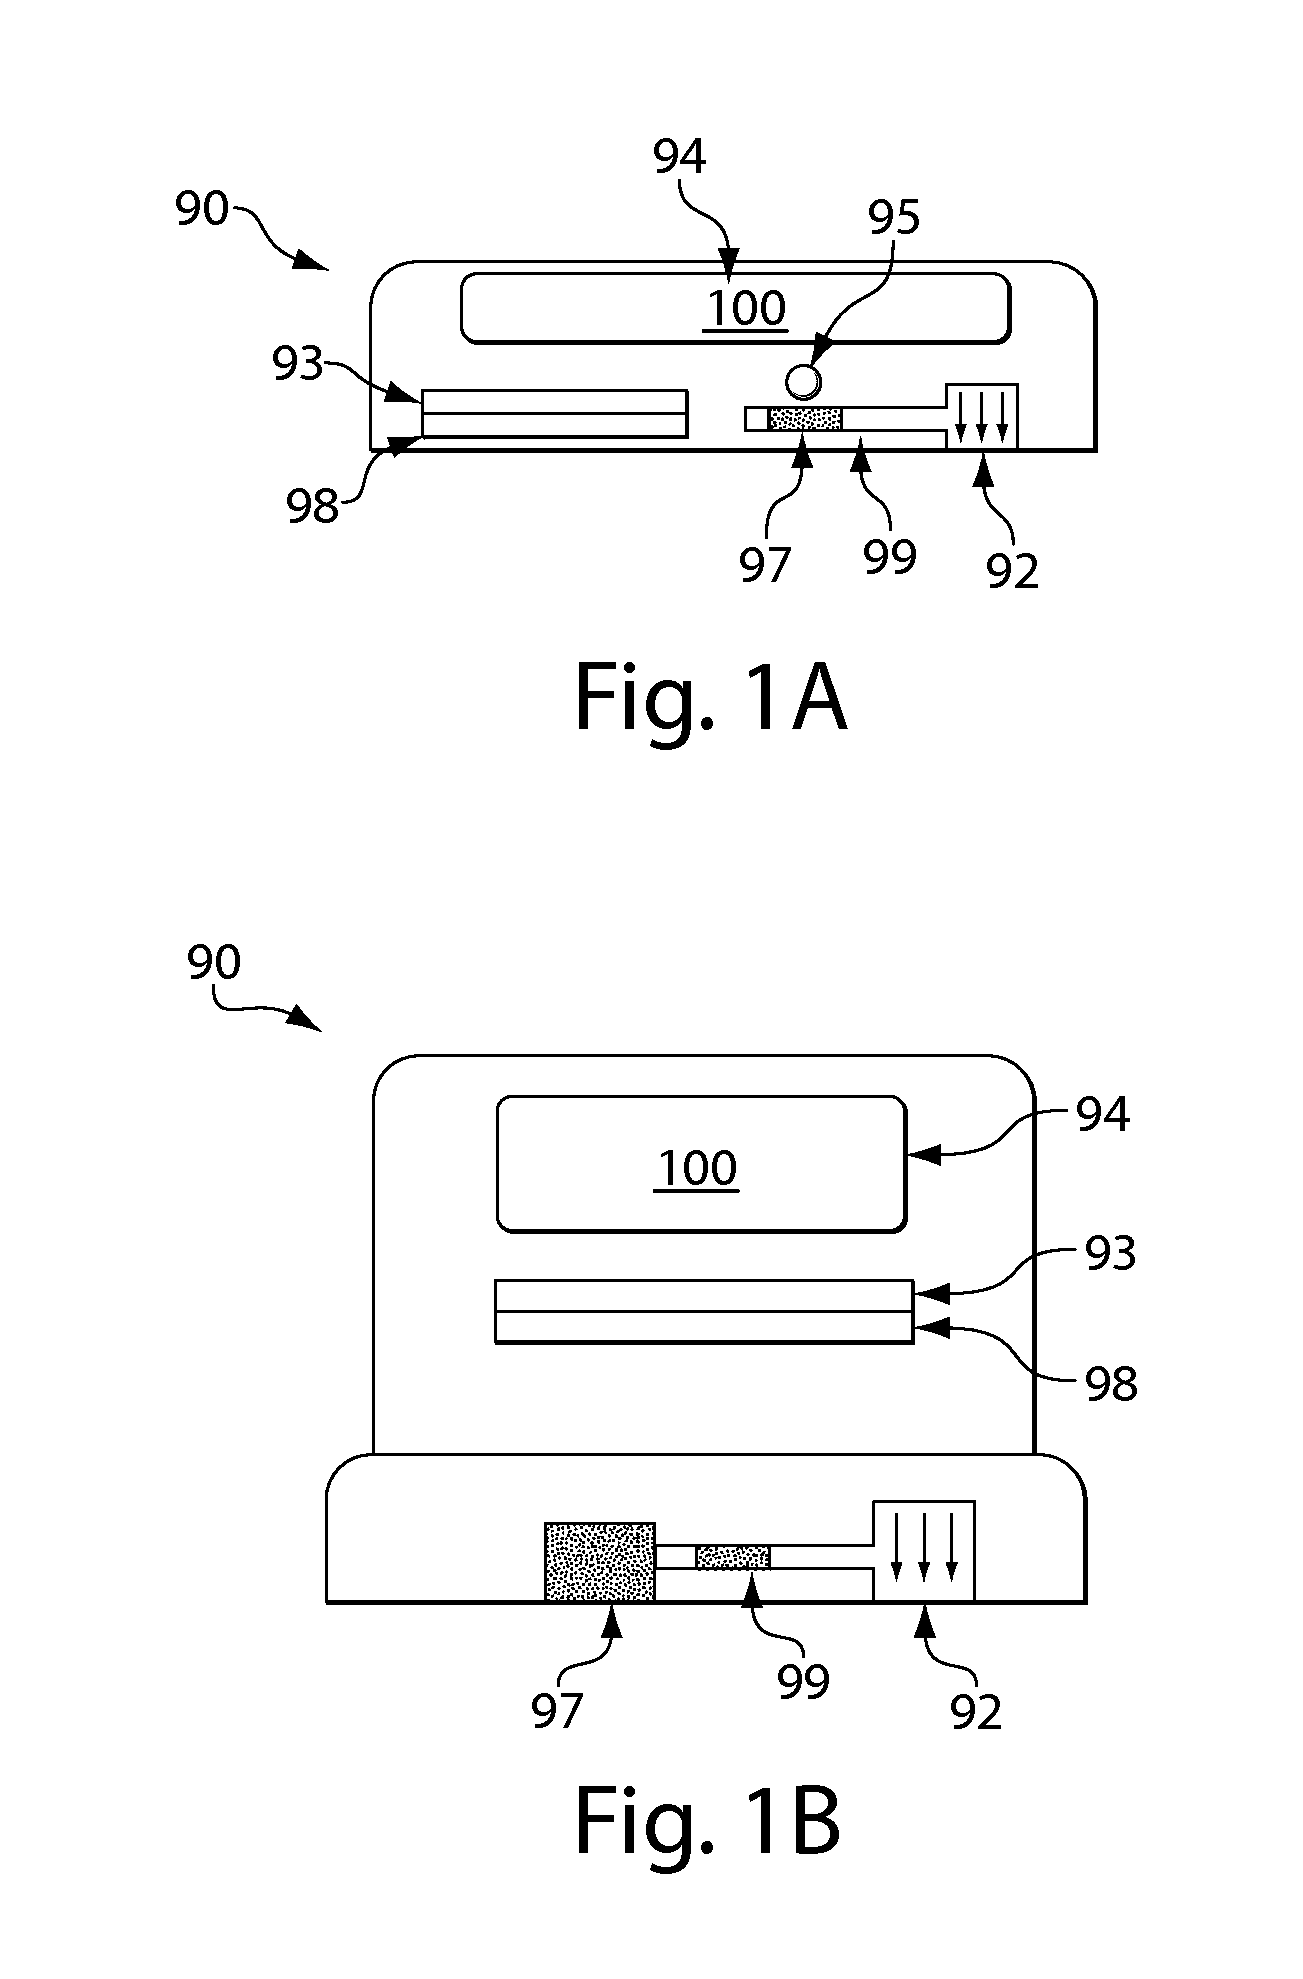 Rapid delivery and/or receiving of fluids